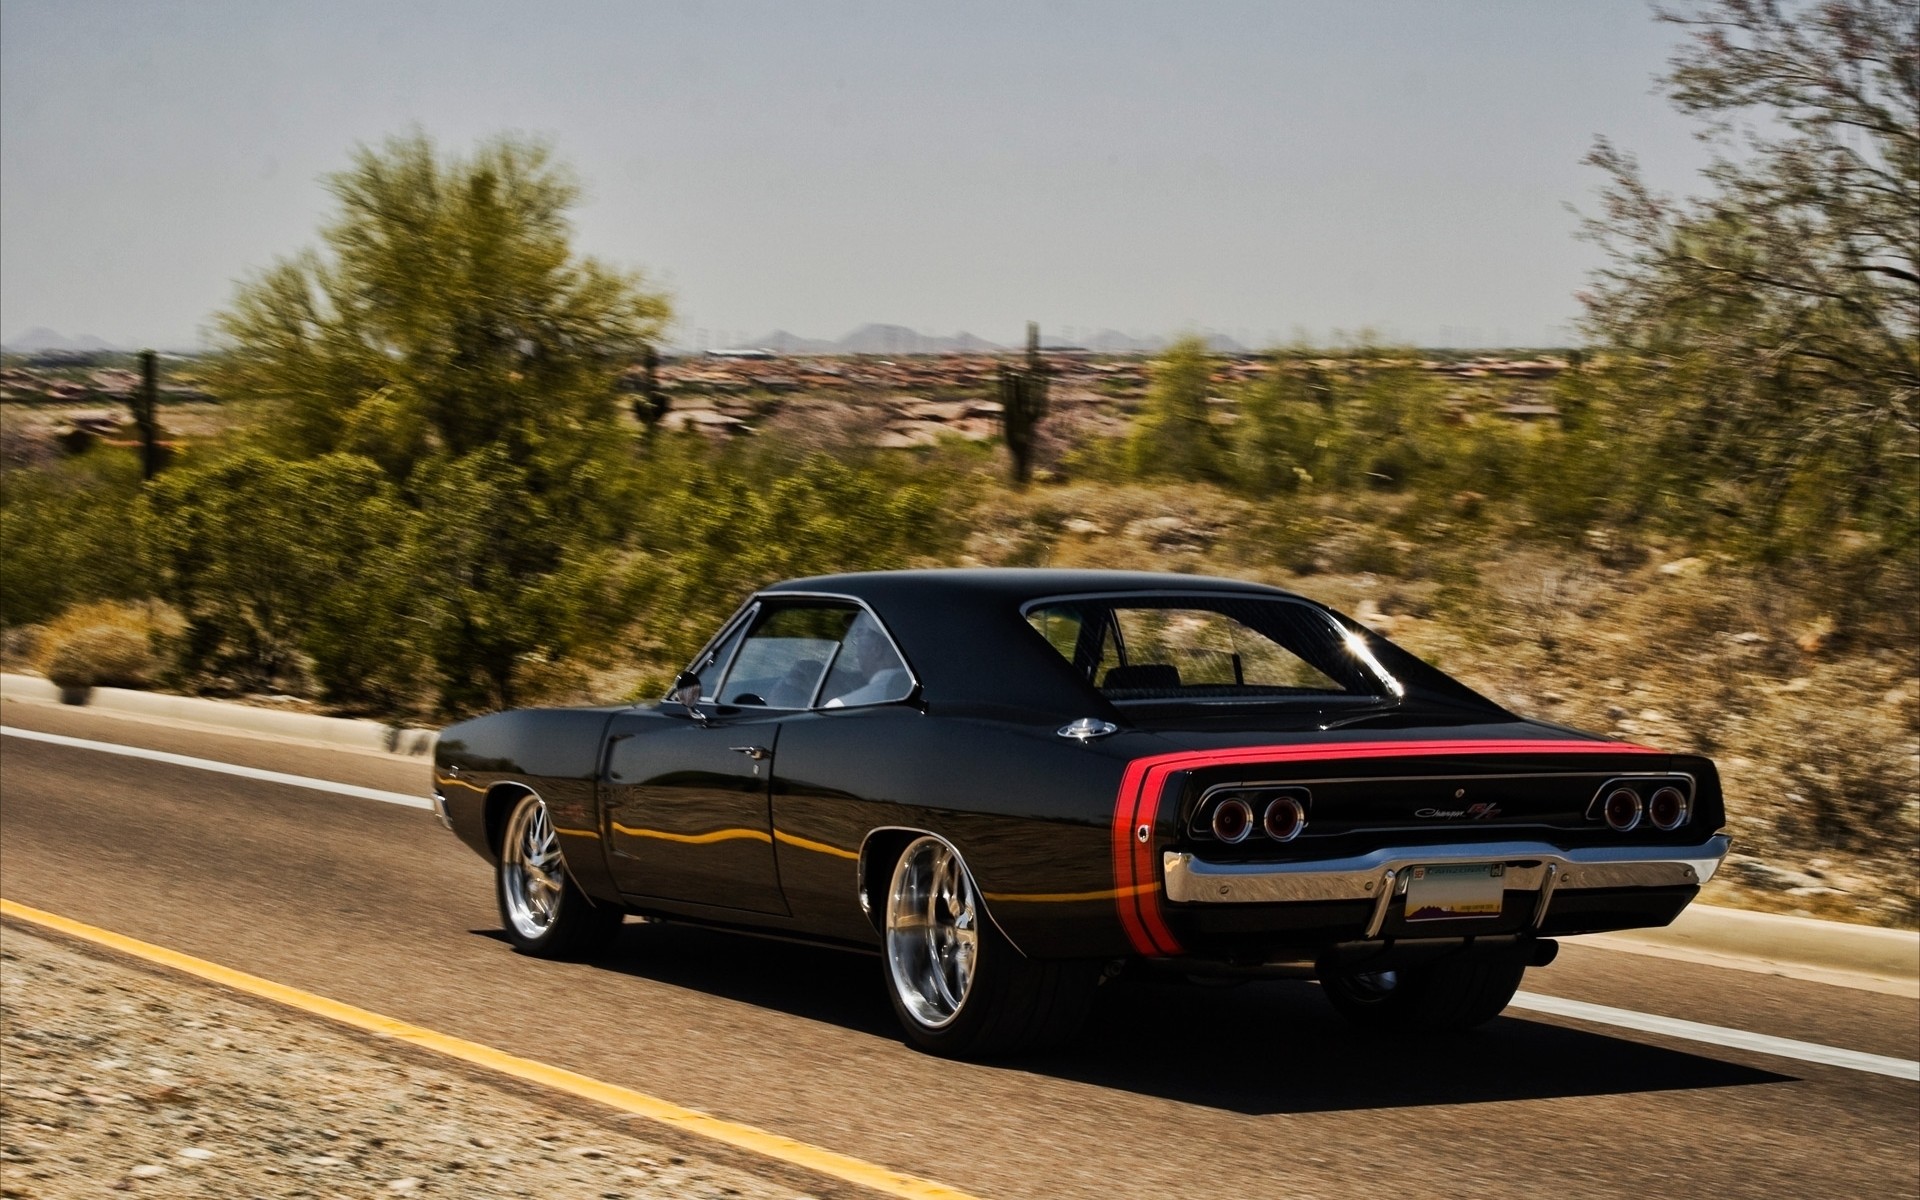 1920x1200 1970 hd dodge charger background cool images hd download apple background  wallpapers colourfull free display lovely